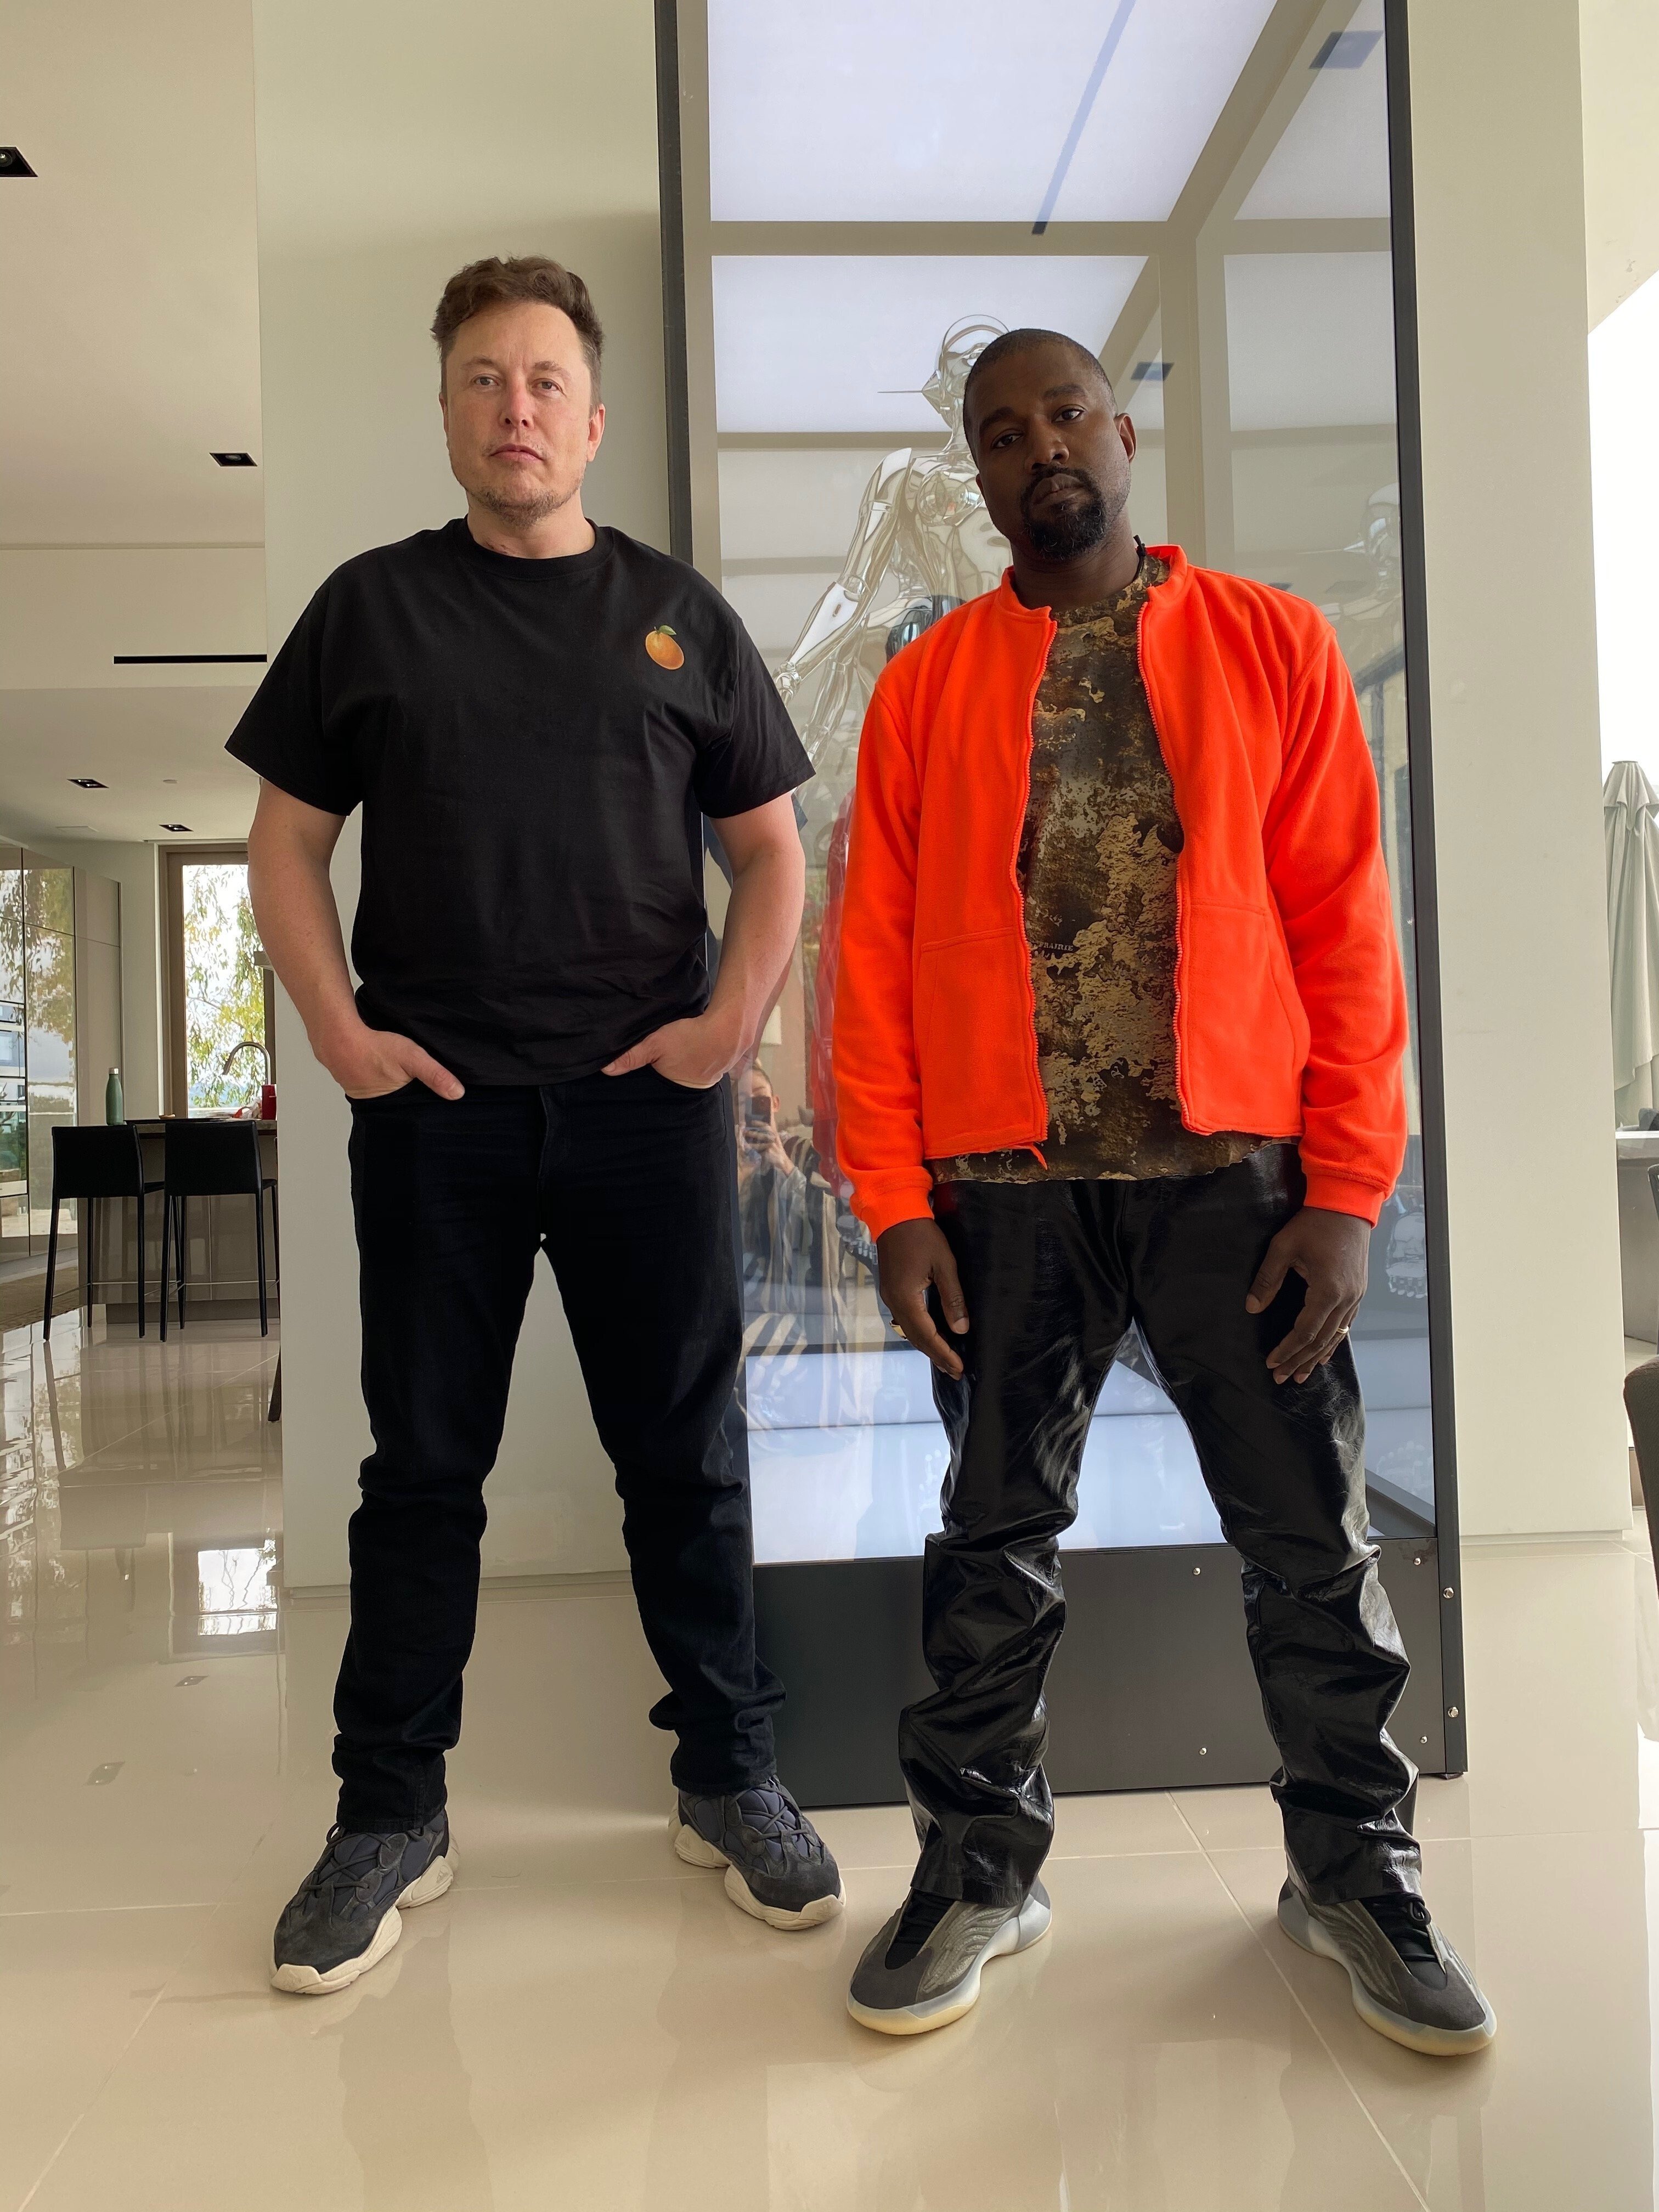 Strike a pose: Elon Musk and Kanye West bring the swagger to Twitter. Photo: @ye/ Twitter